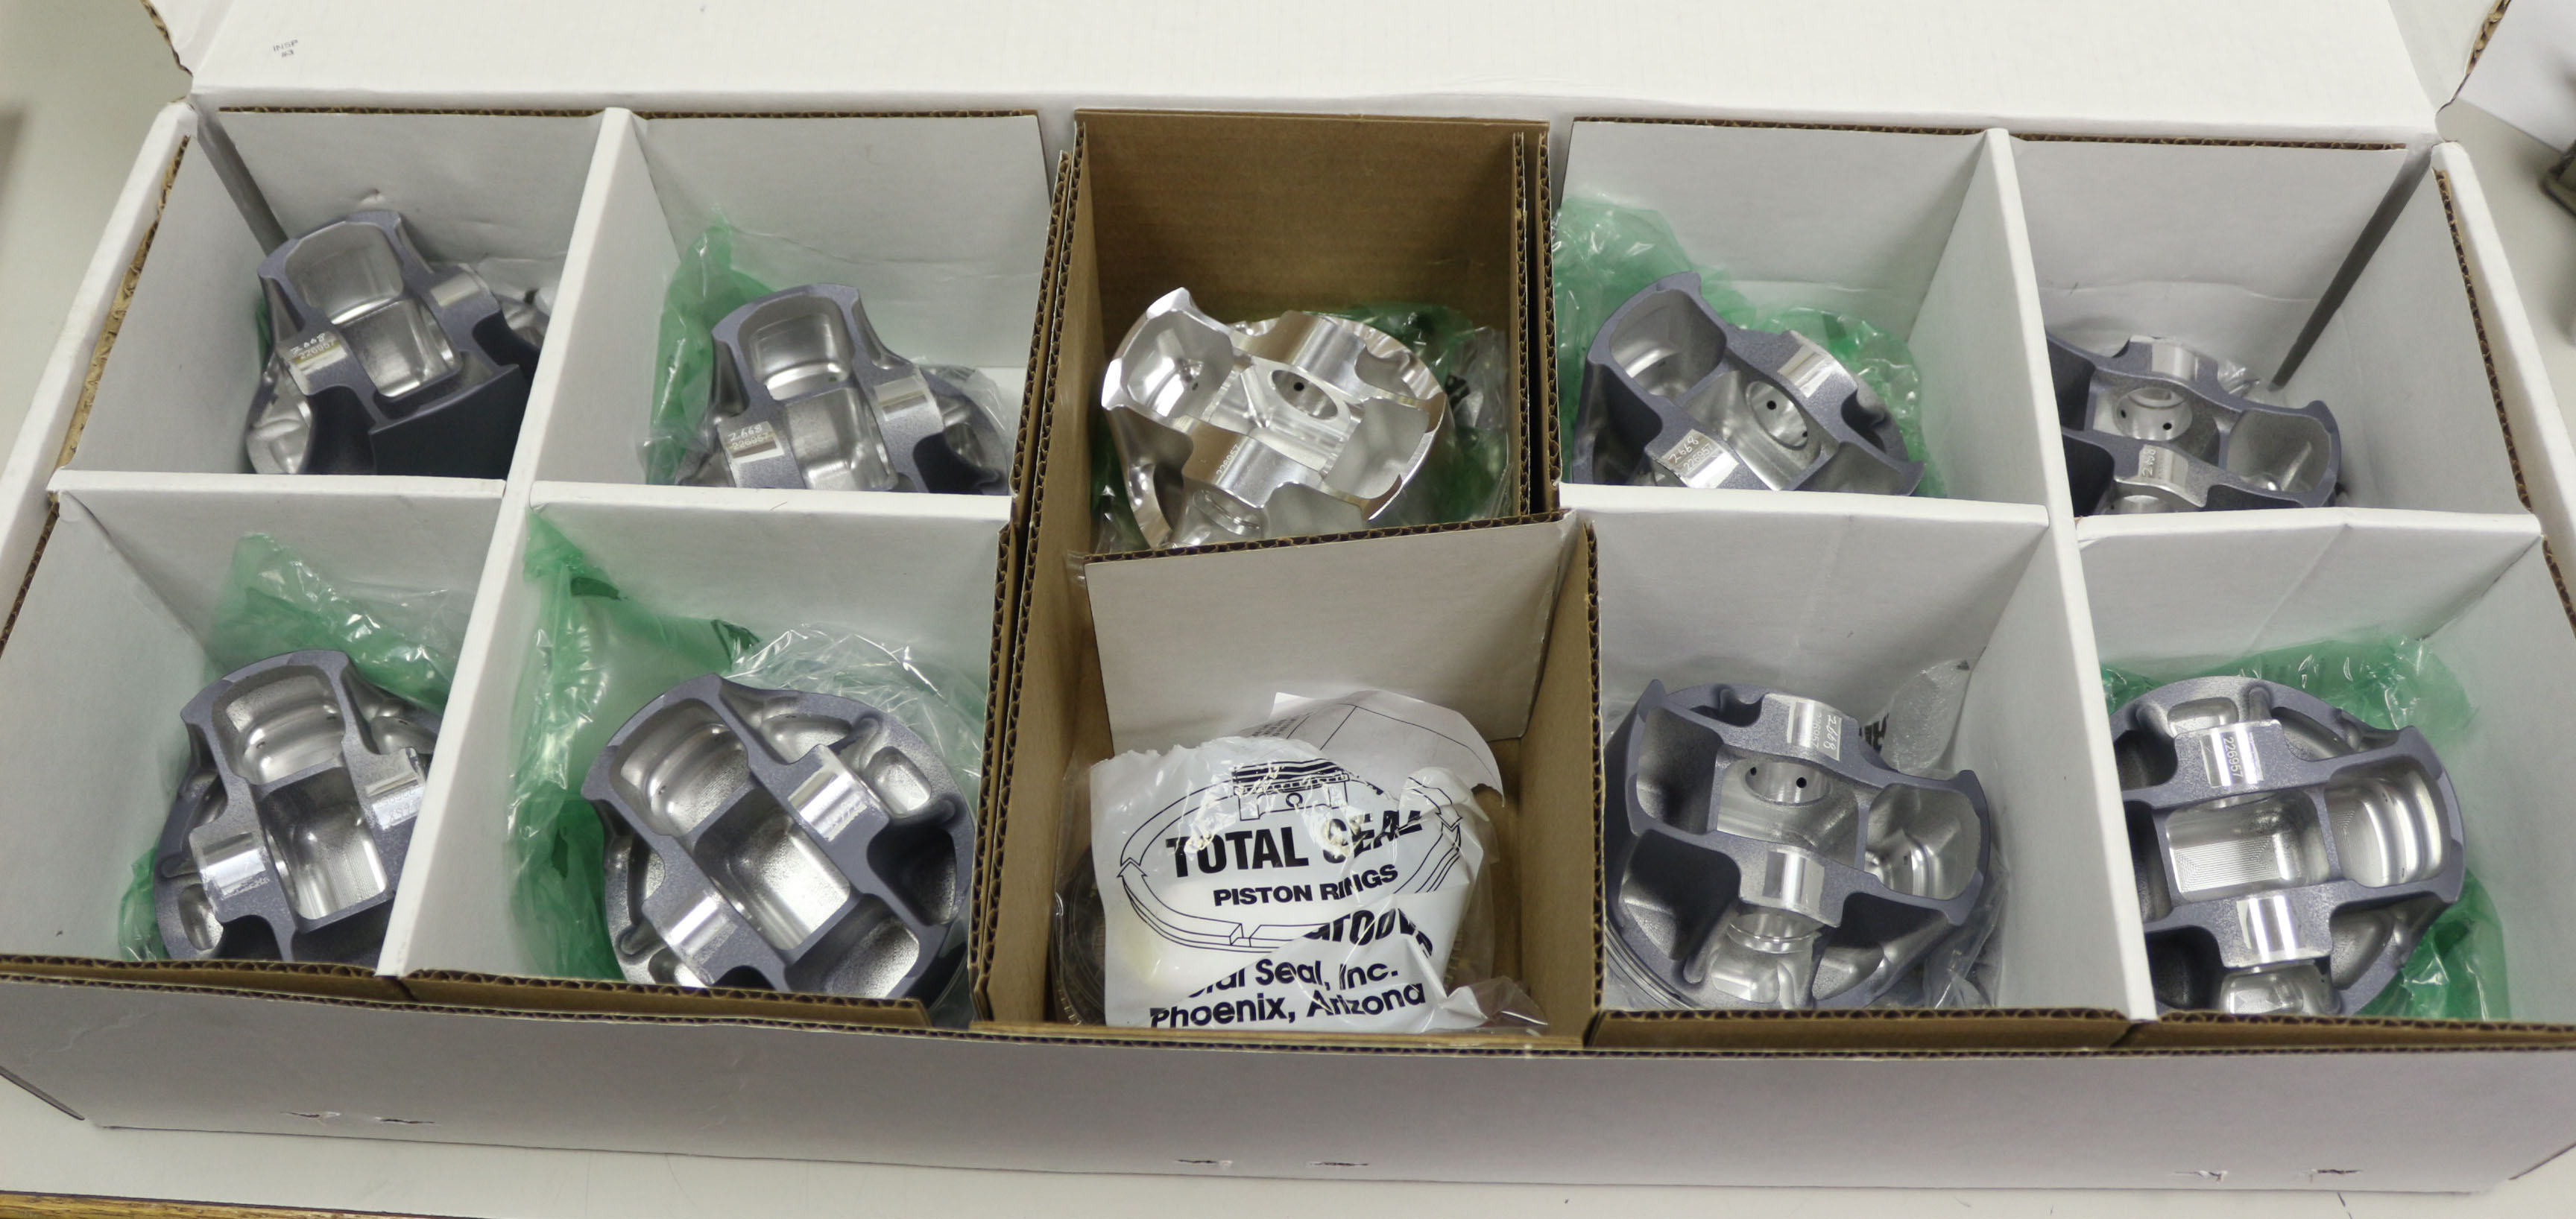 Finished set of pistons ready to ship